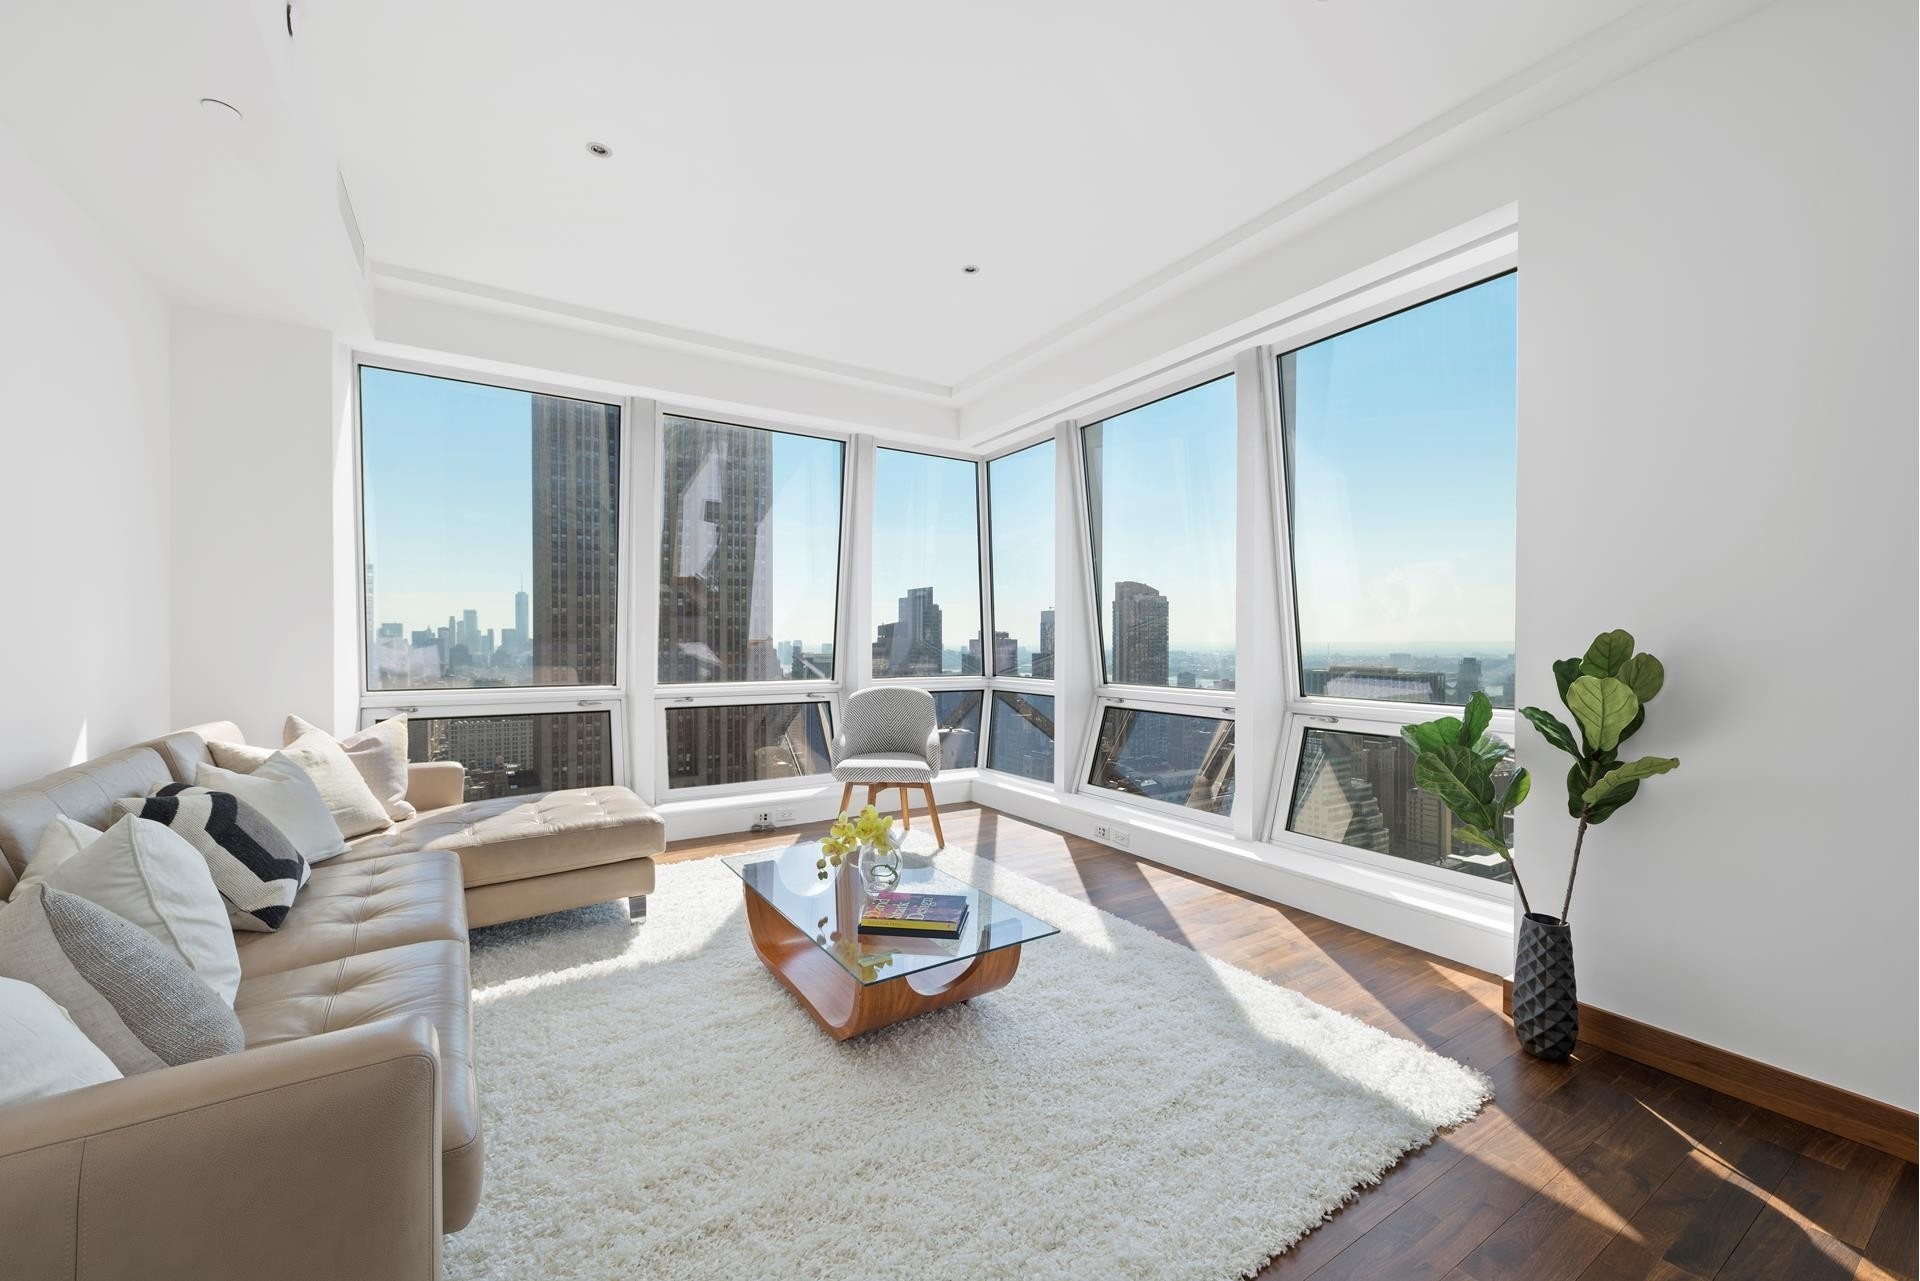 Condominium at 400 Fifth Avenue, 48G Midtown South Central, New York